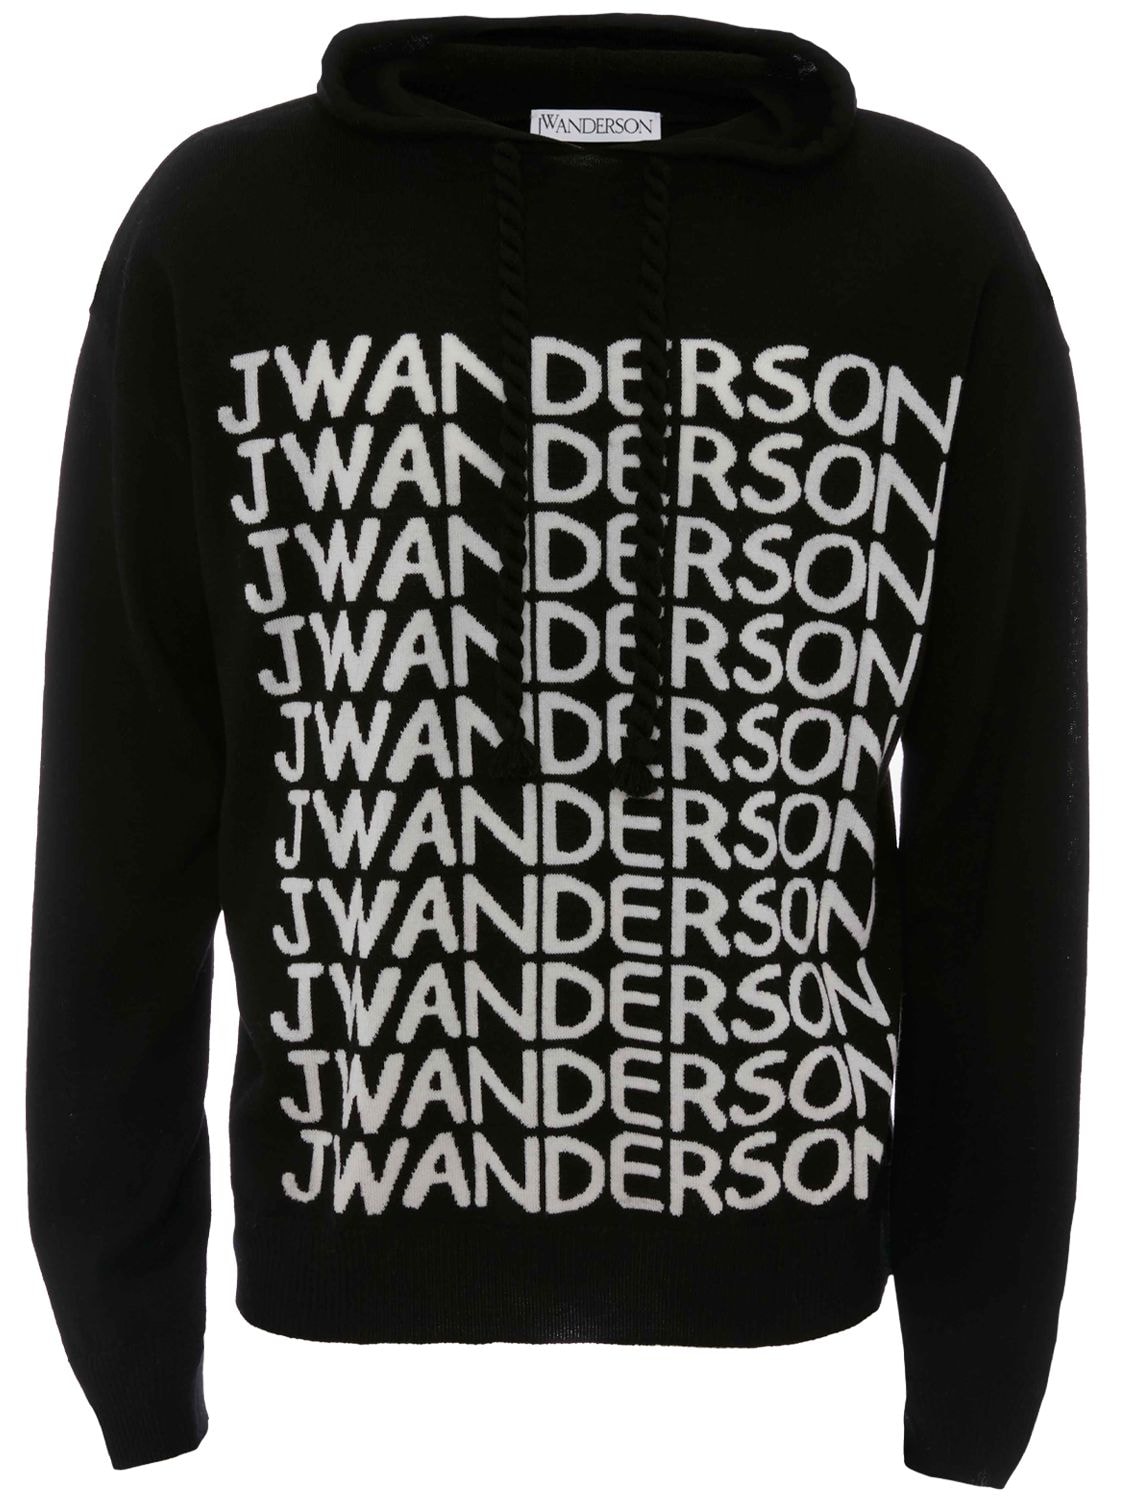 JW ANDERSON REPEATED LOGO JACQUARD KNIT HOODIE